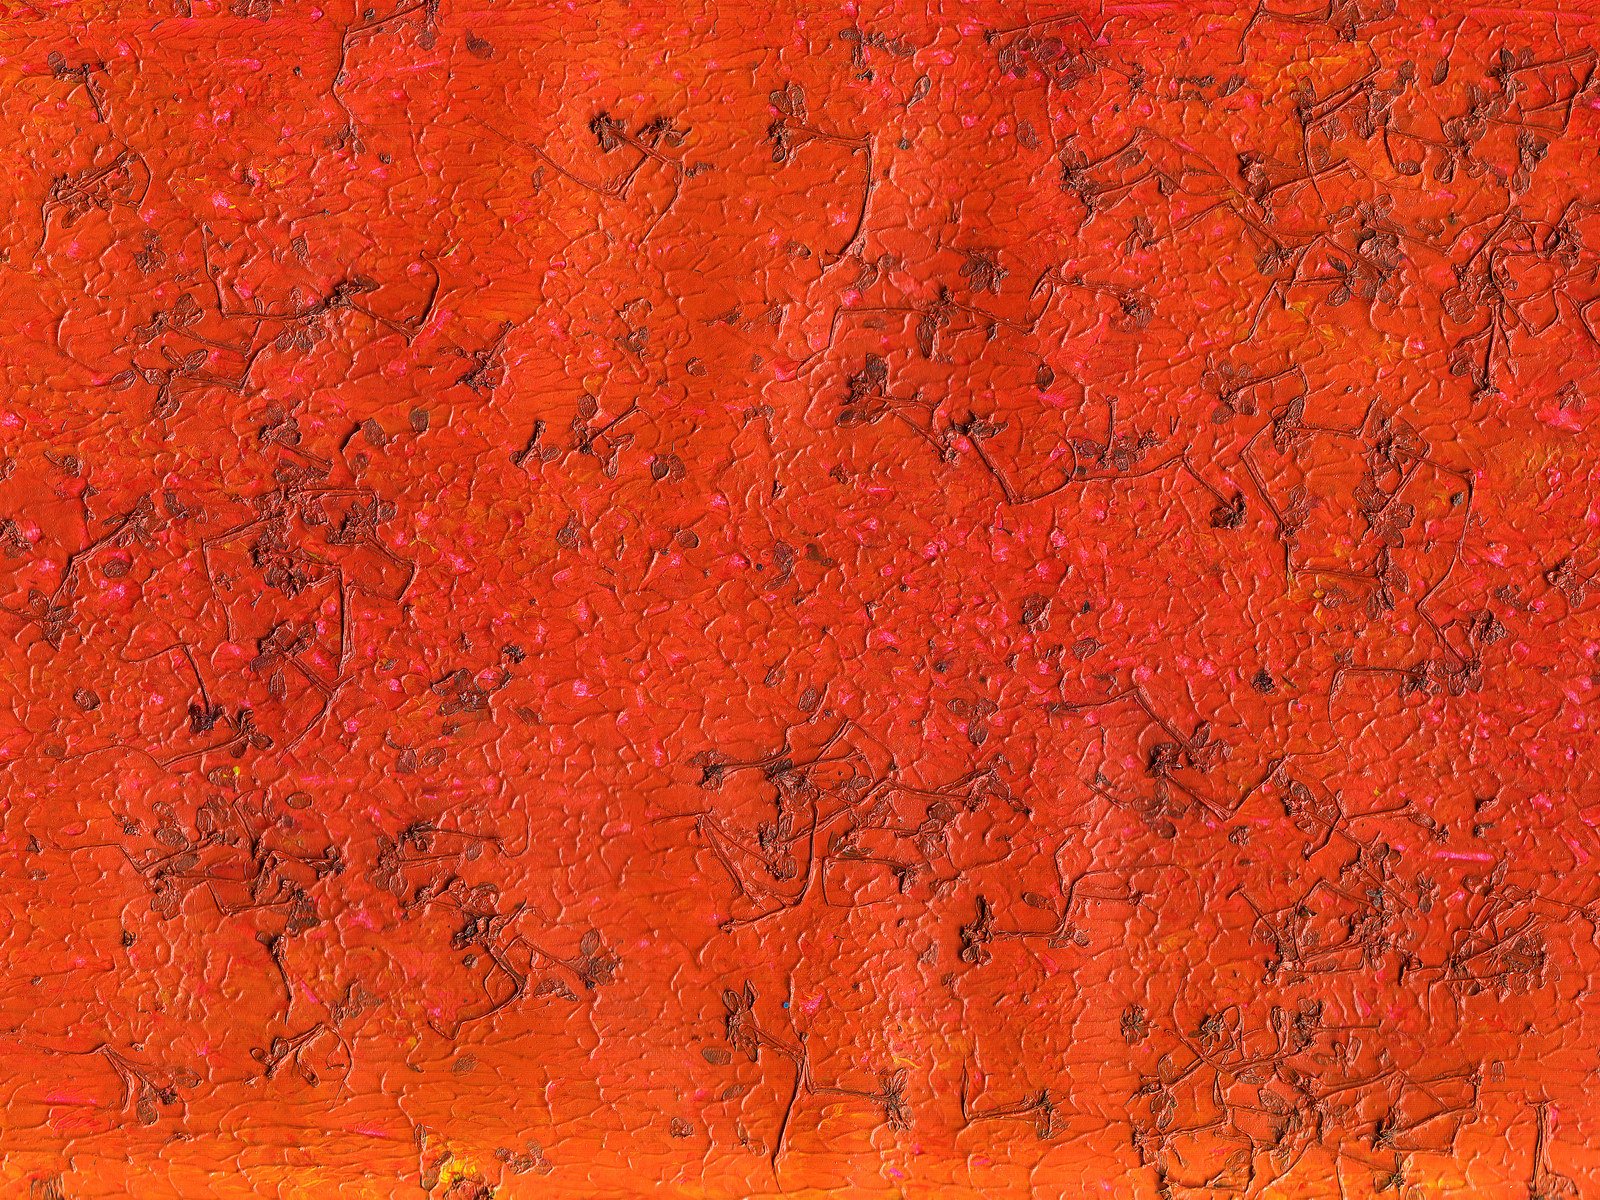 an image of an abstract painting of orange and black